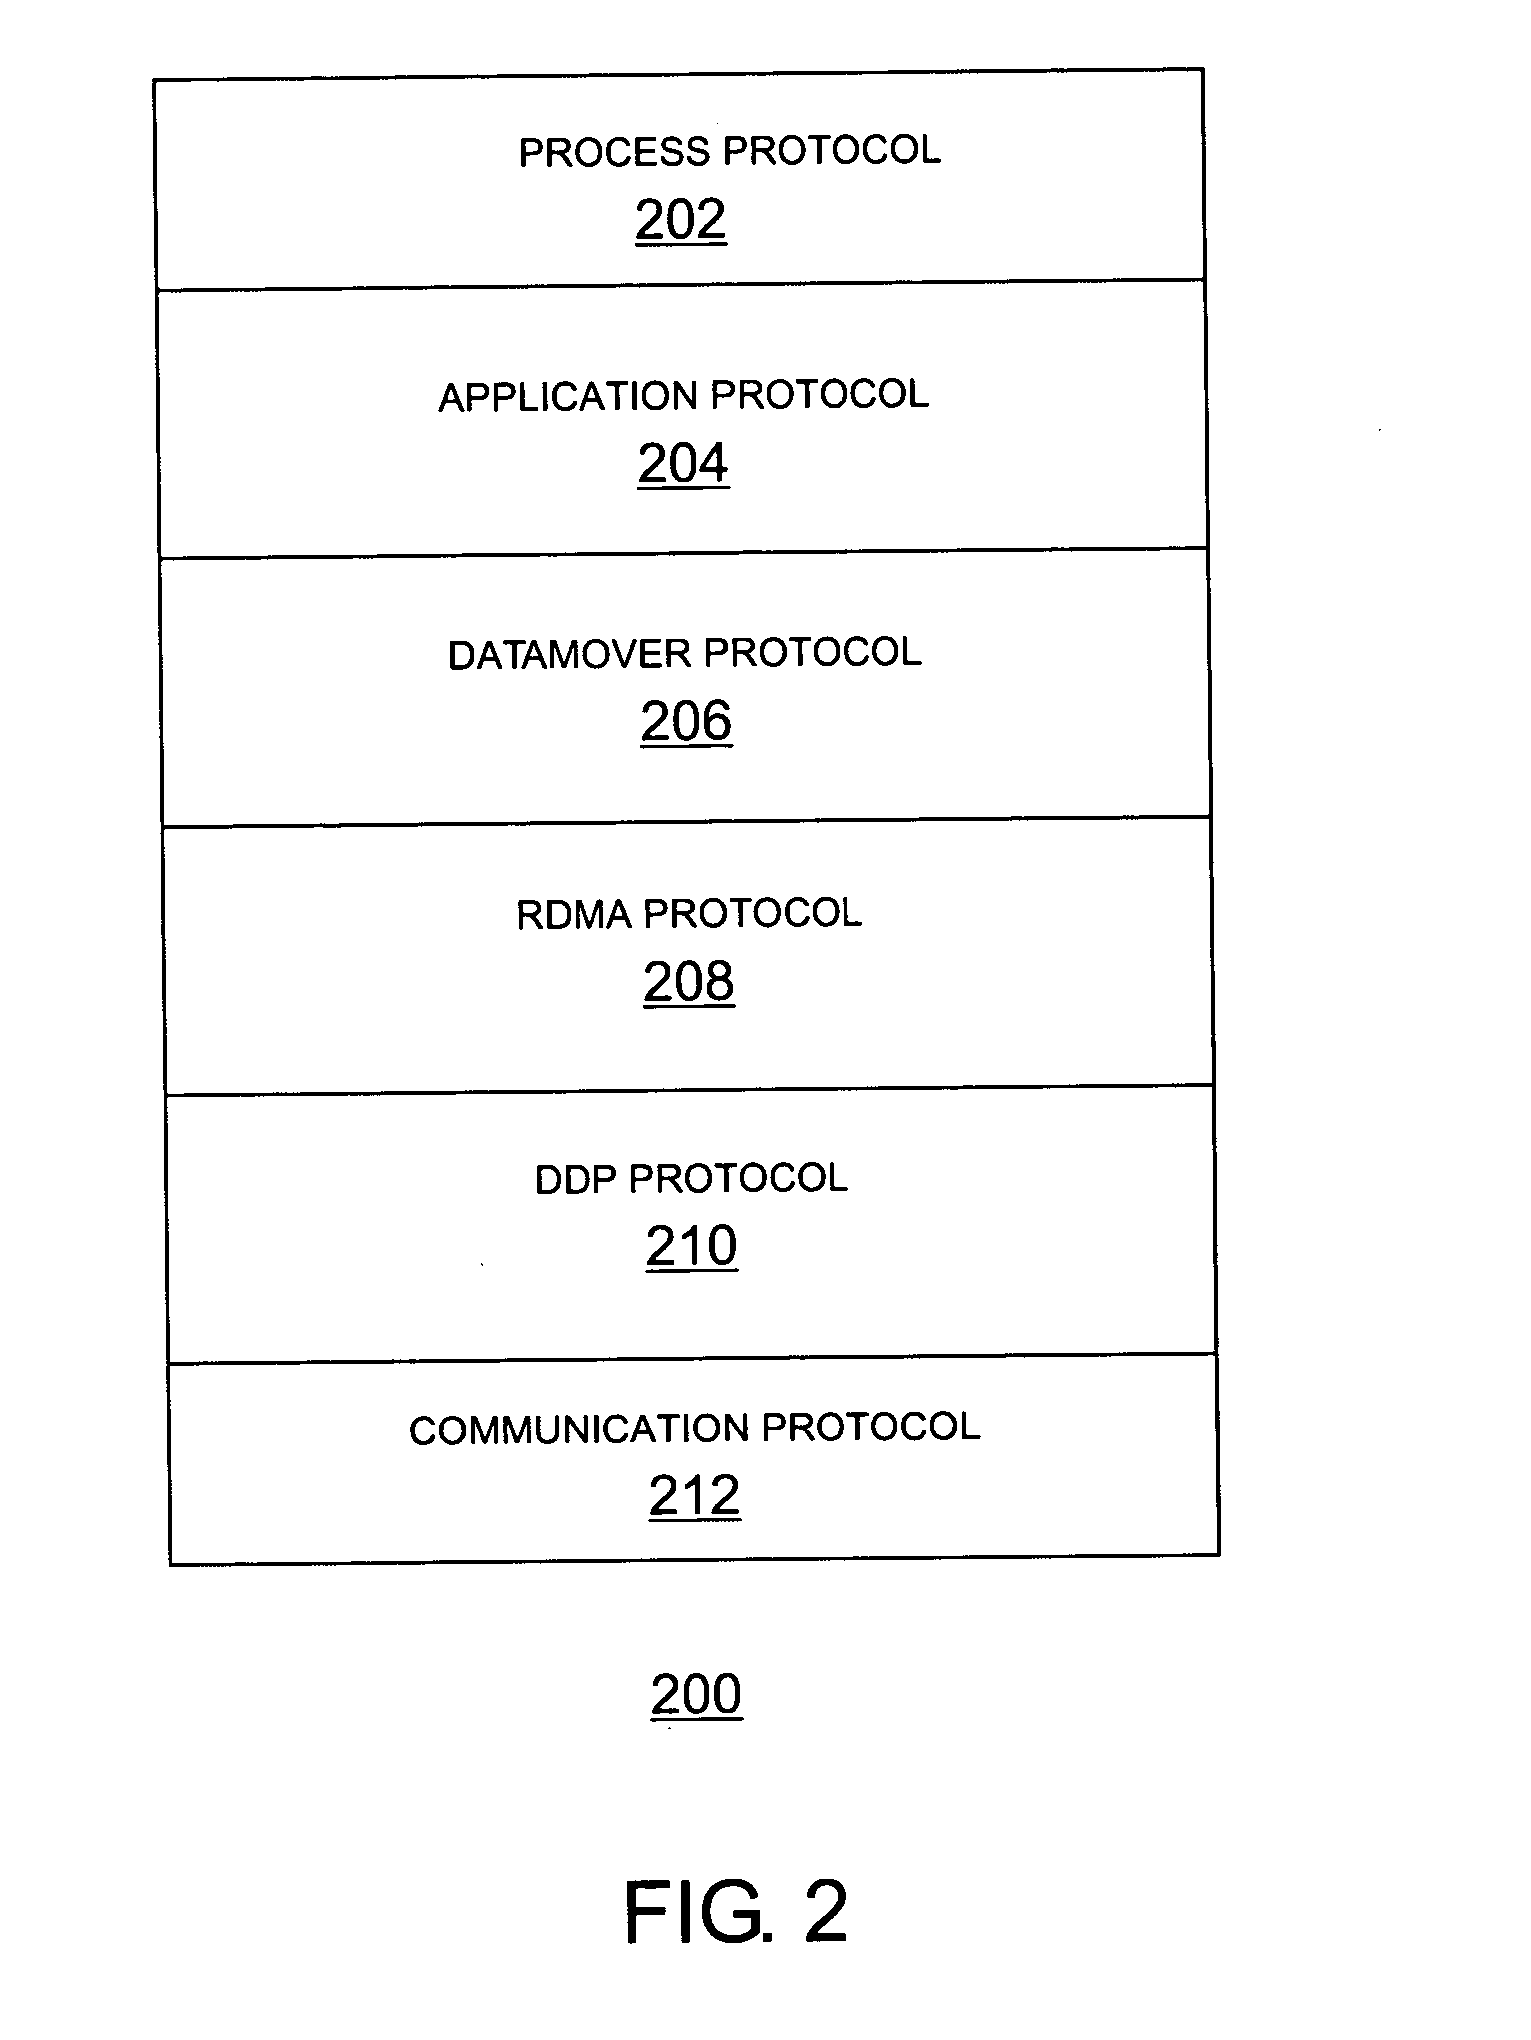 Method and apparatus for acknowledging a request for a data transfer